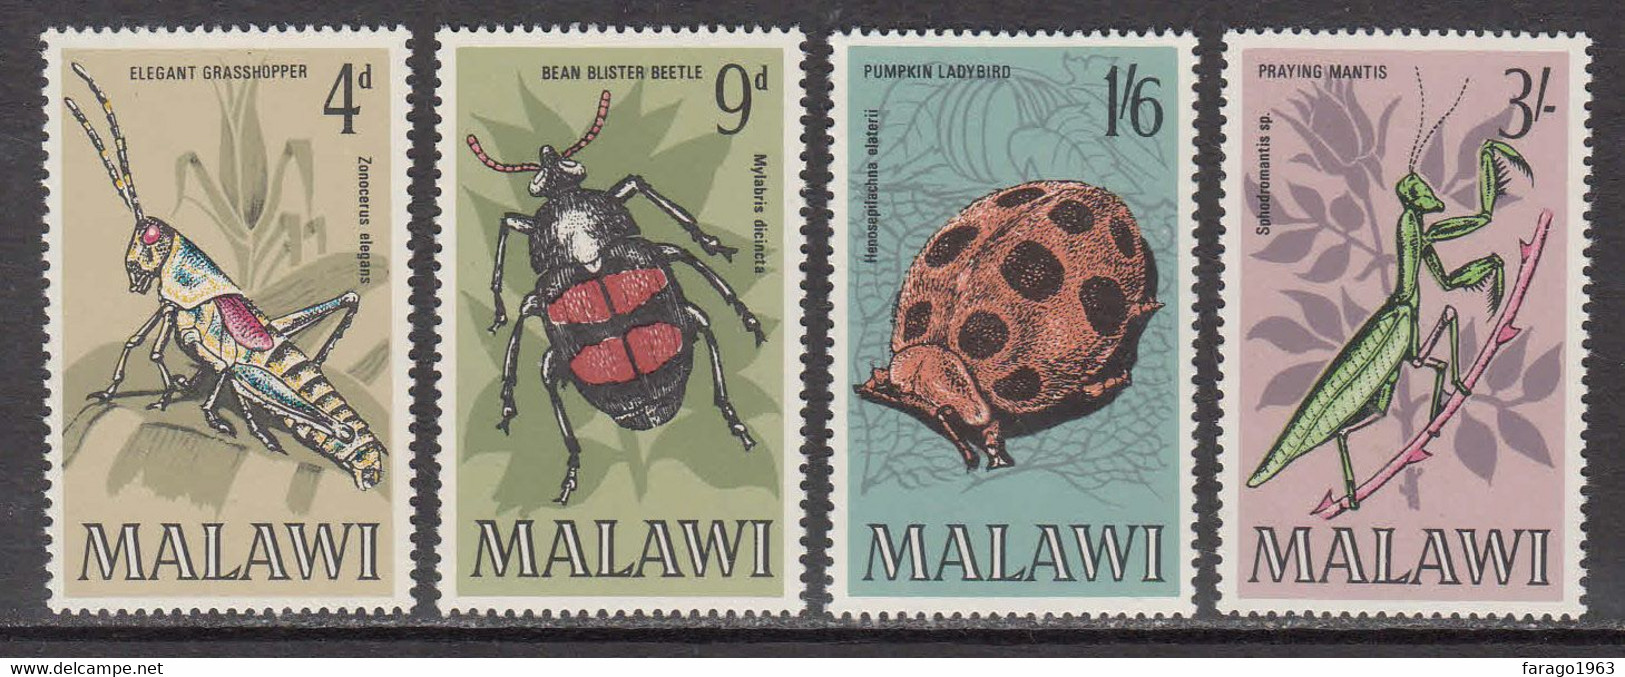 1970  Malawi Insects Complete Set Of 4 MNH - Malawi (1964-...)